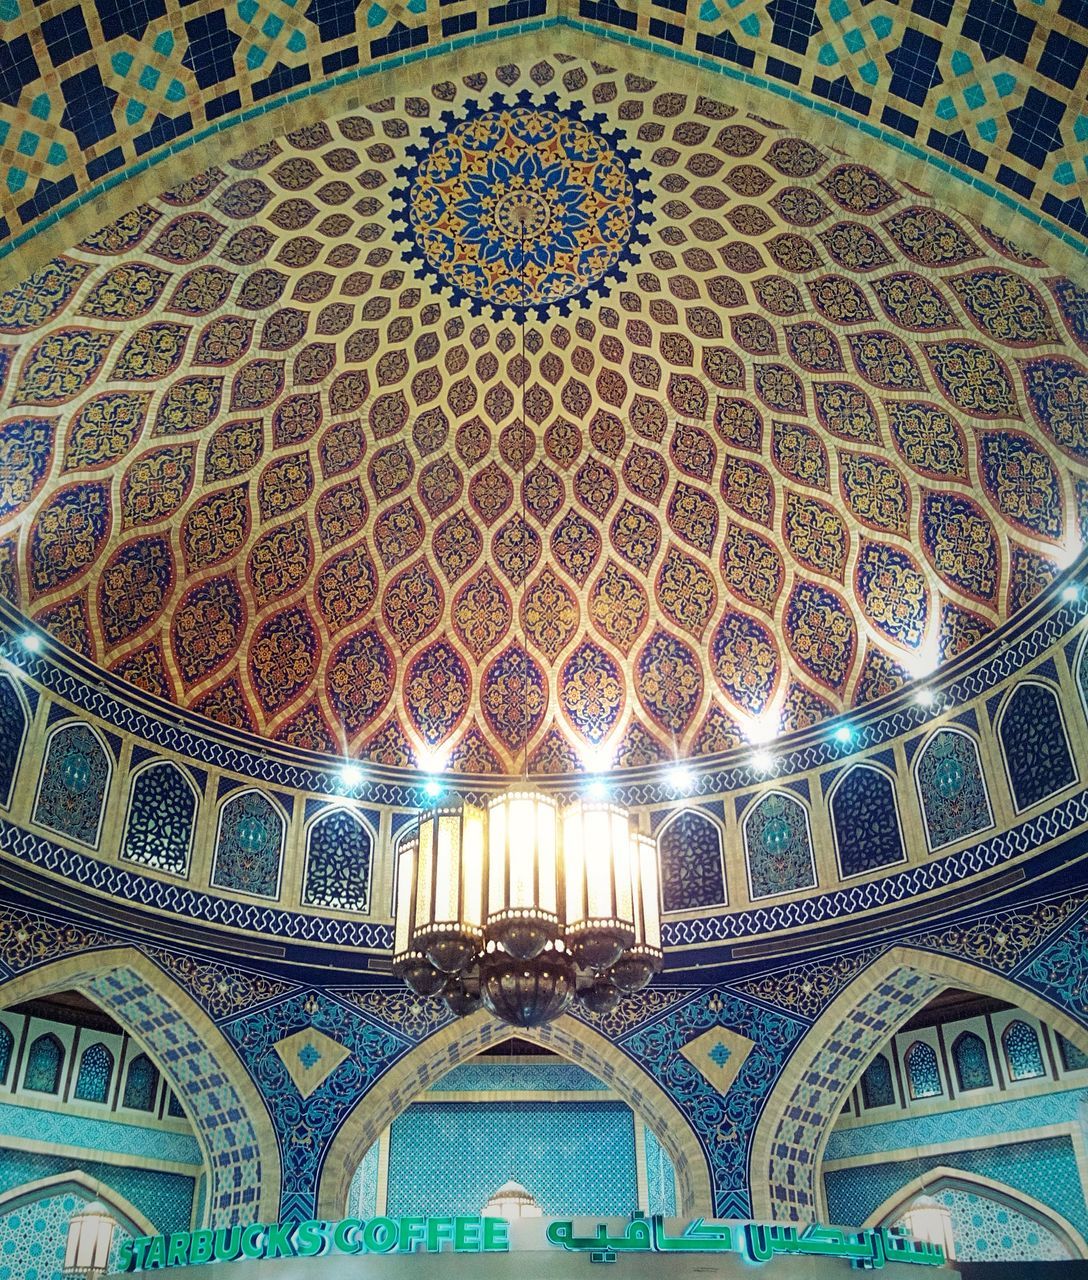 LOW ANGLE VIEW OF ORNATE CEILING